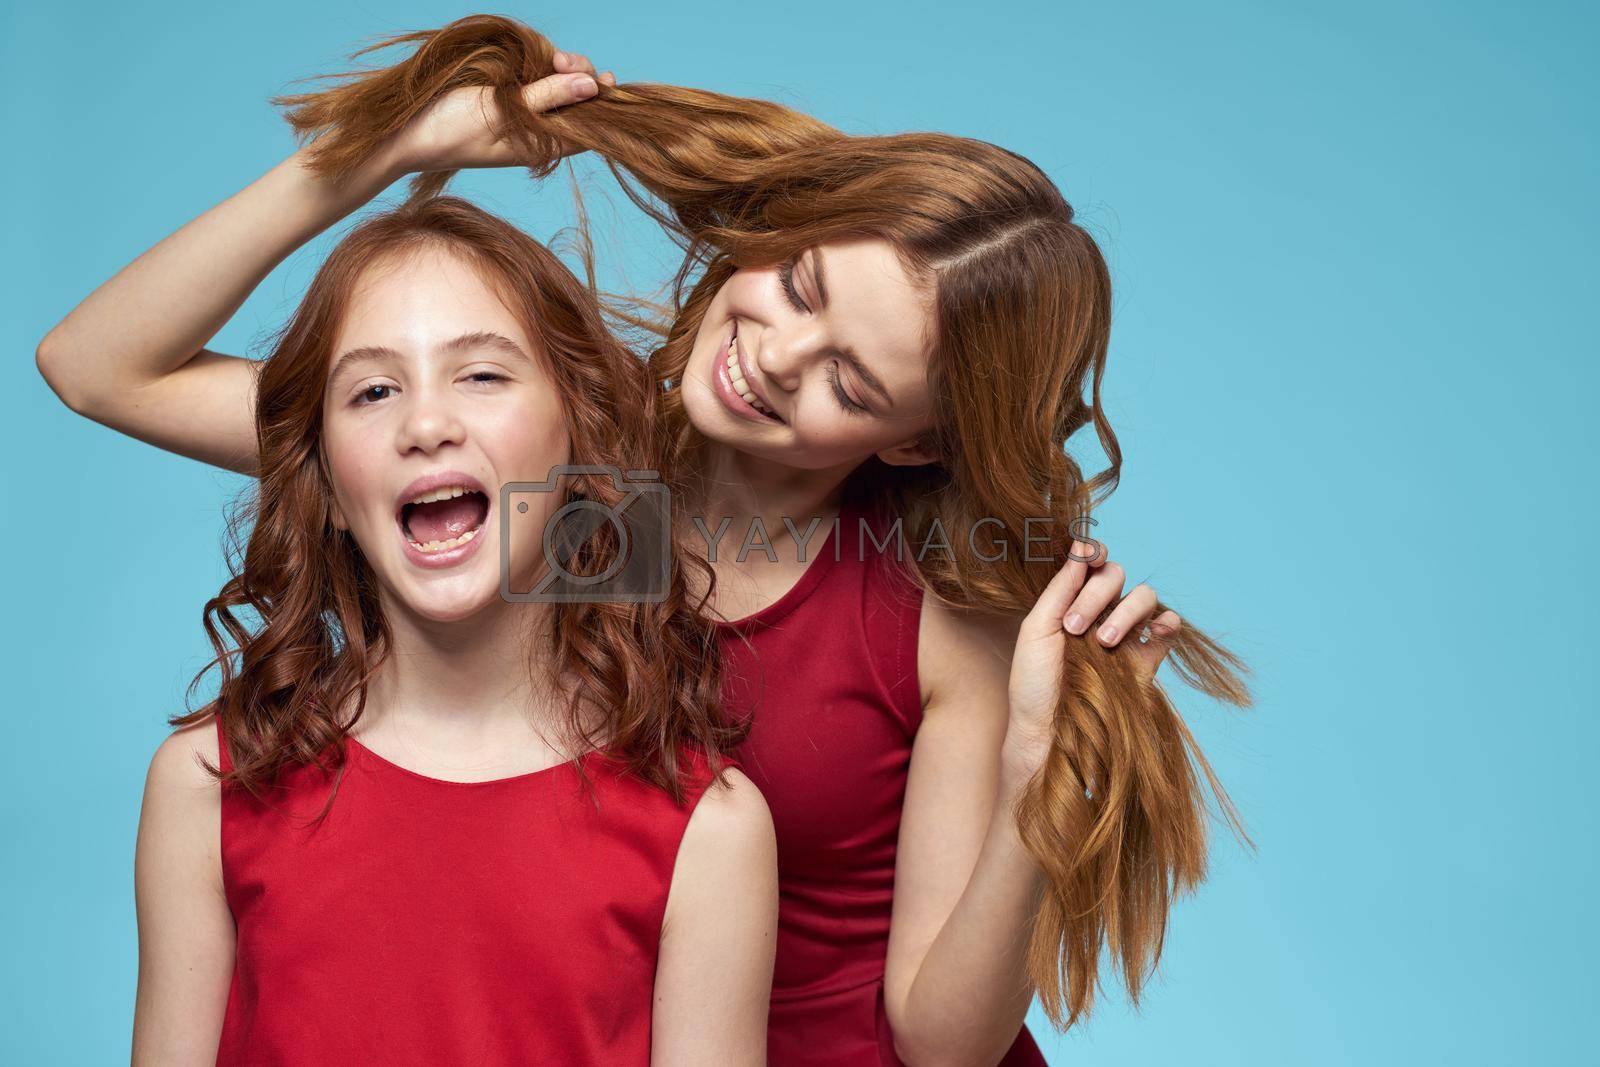 Cheerful mom and daughter hugs joy lifestyle communication friendship blue background. High quality photo